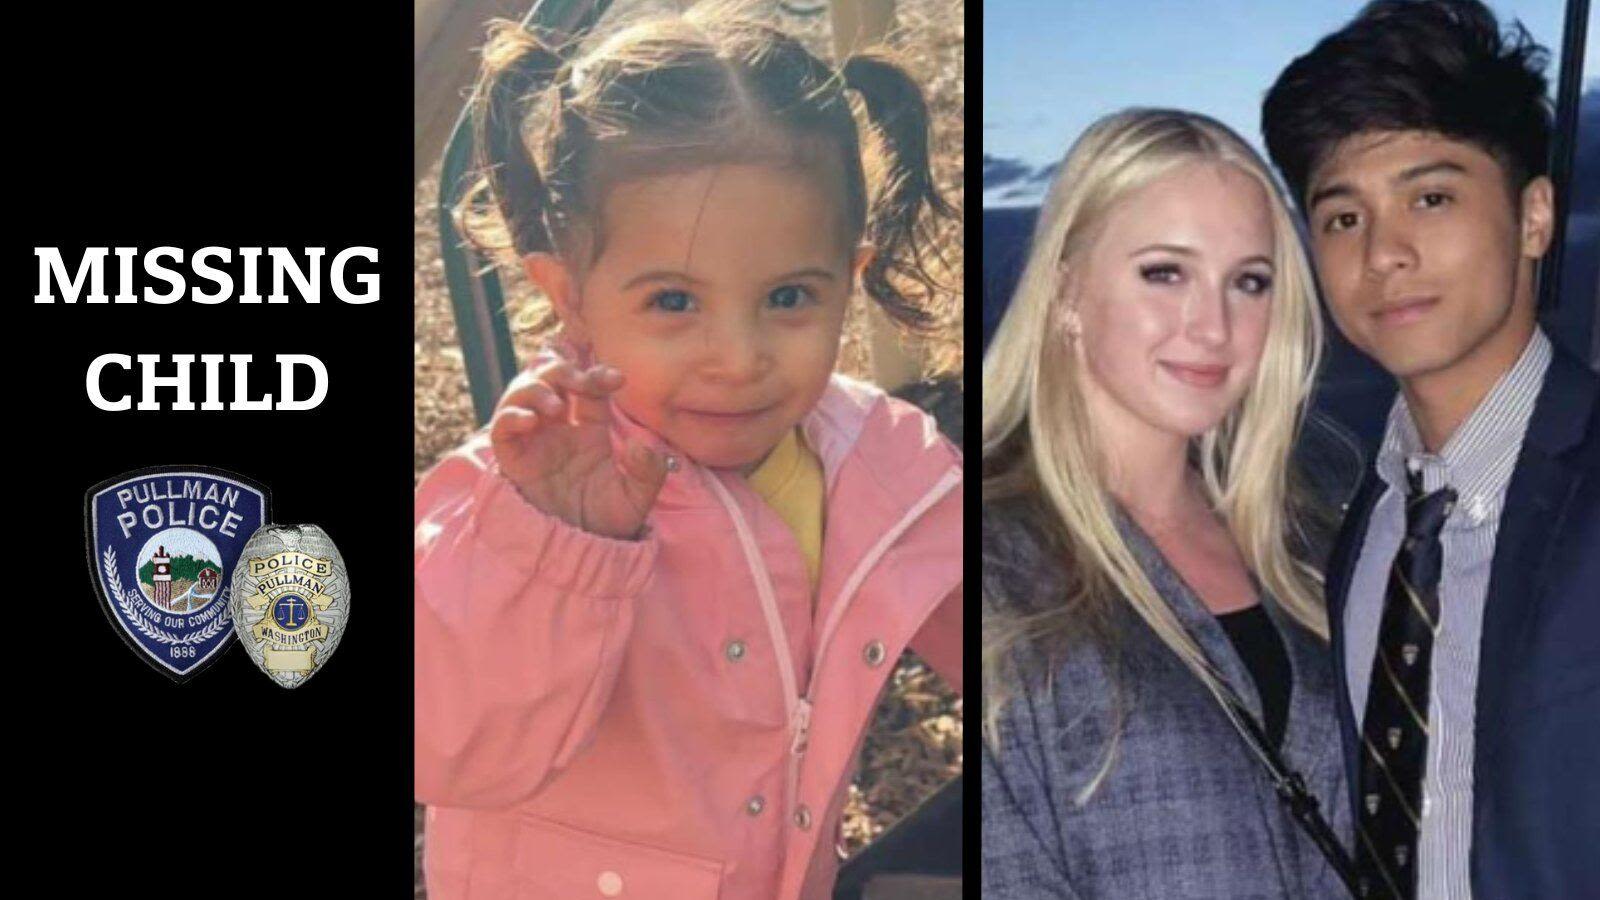 Missing 2-year-old with couple who fled to Mexico, Pullman police say | FOX 28 Spokane